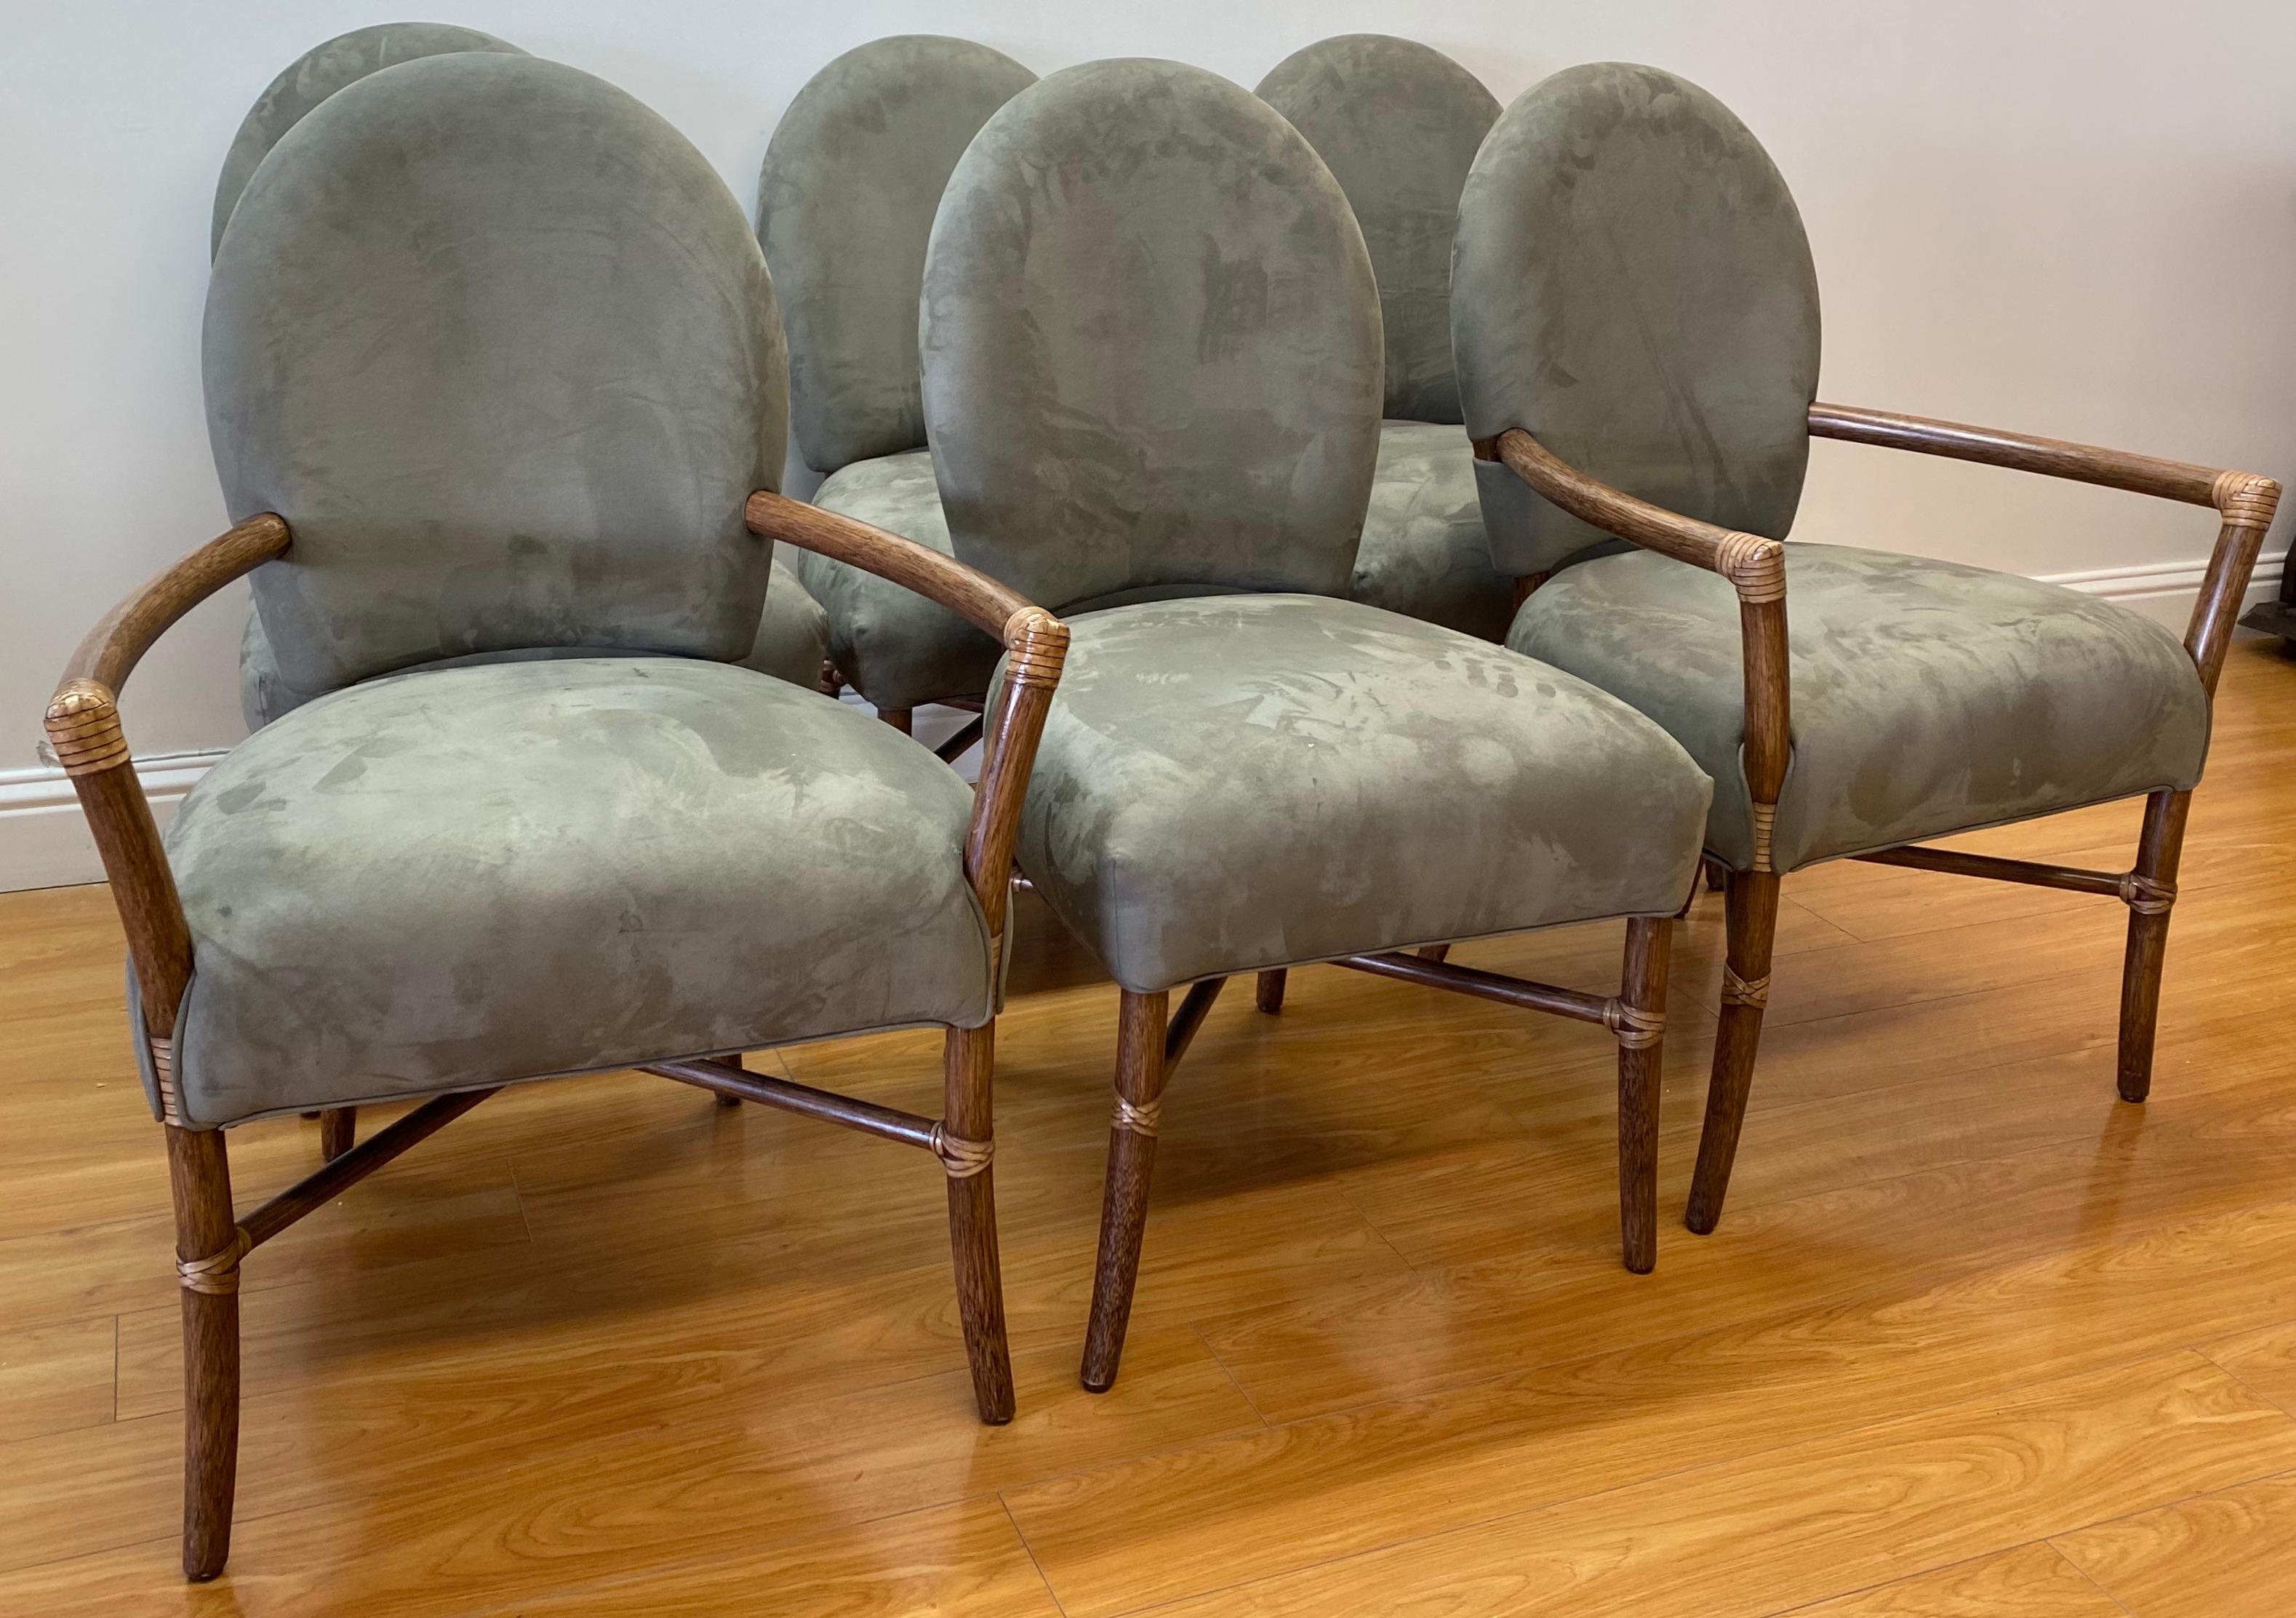 Set of Six McGuire plush fabric and bentwood dining chairs, 21st century

Set of gorgeous preowned dining chairs

Four side chairs and two armchairs

Lightly used preowned condition

Solid, comfortable and very sturdy!

Armchairs measures: